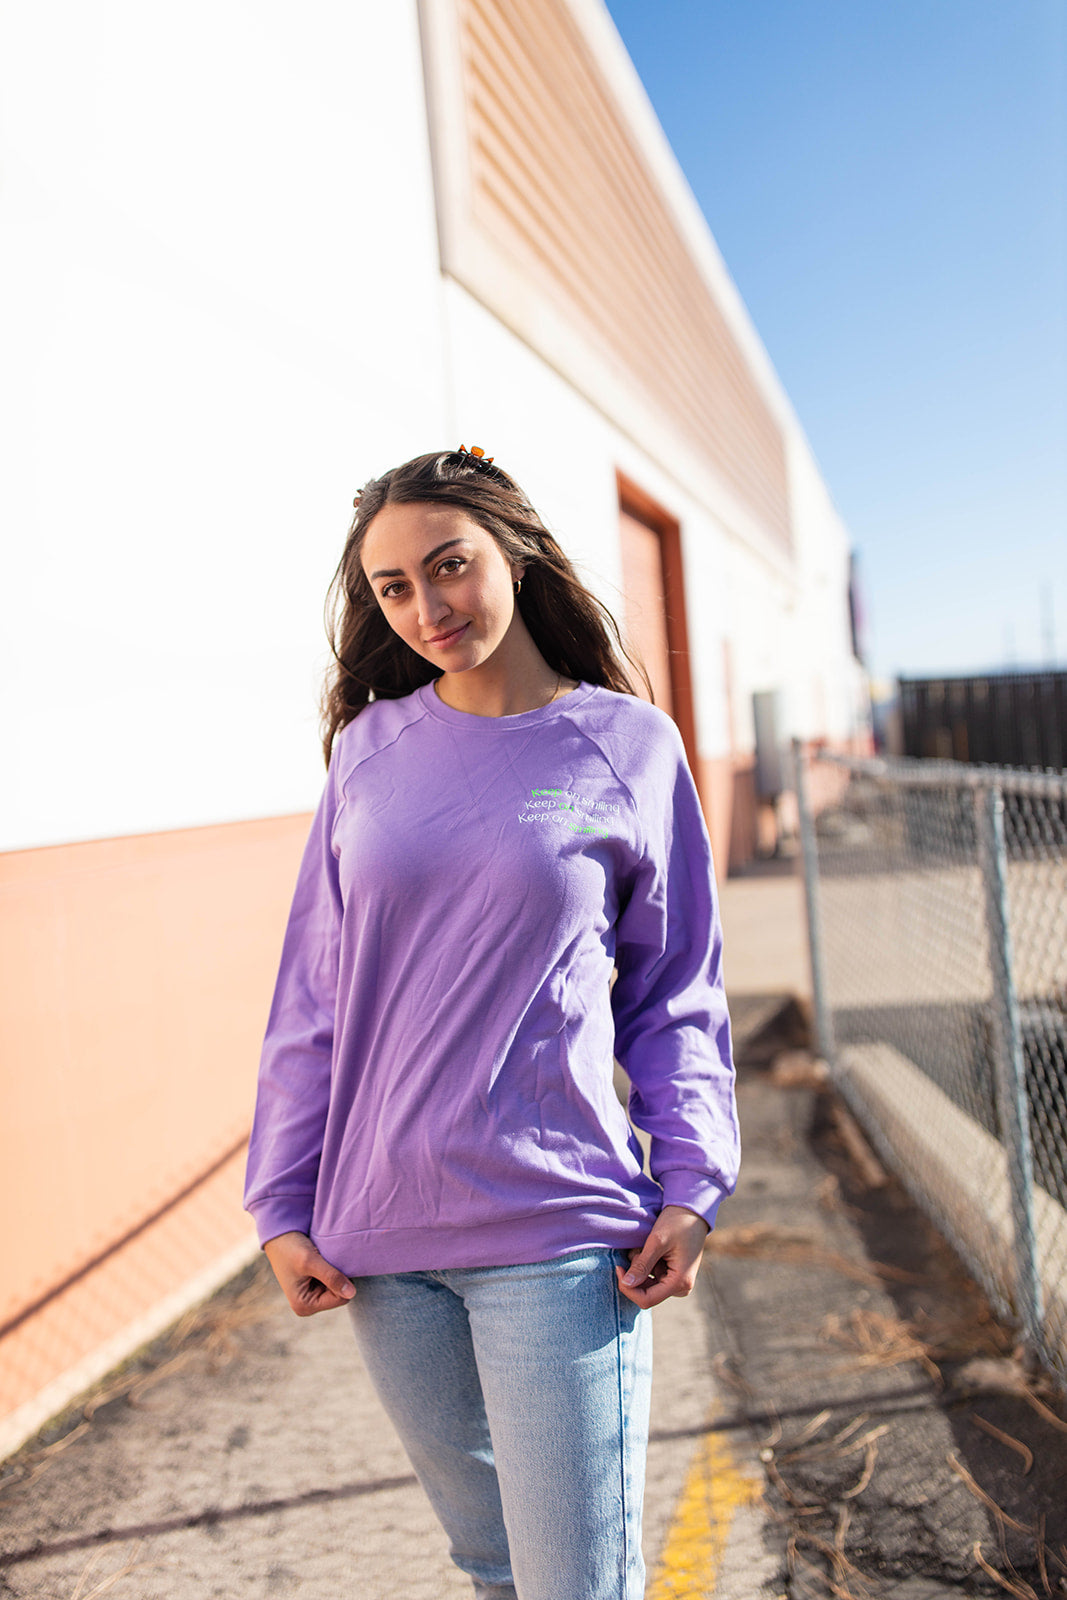 TABY ORIGINAL DESIGN: Keep On Smiling Pullover In LAVENDER*** RESTOCKED***